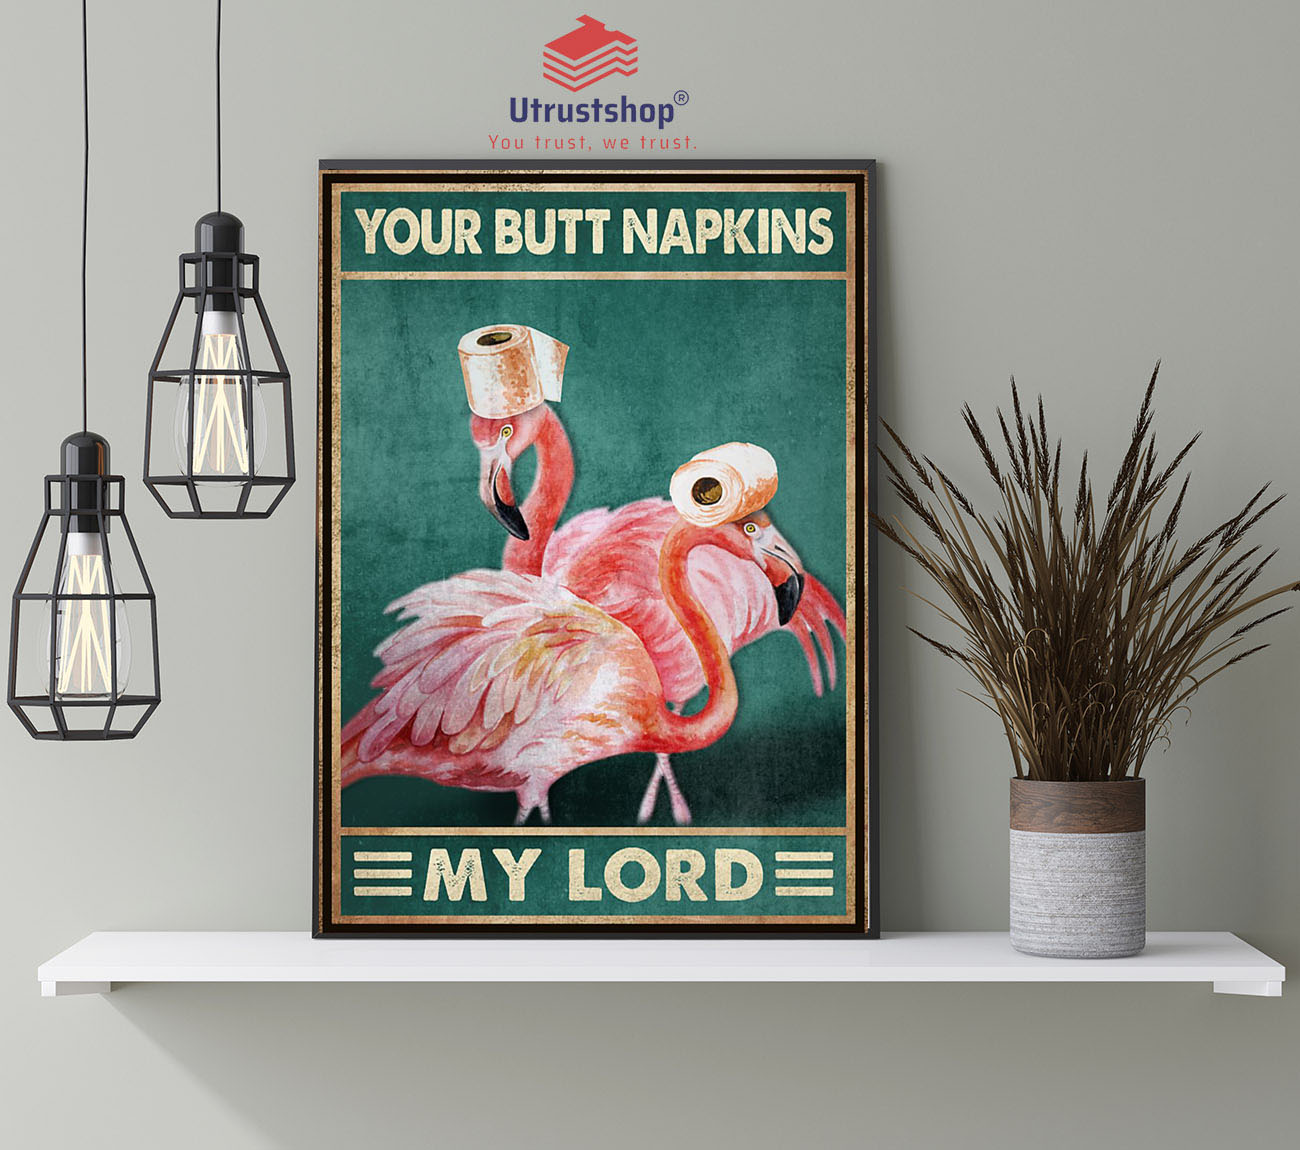 Your butt napkins my lord poster4